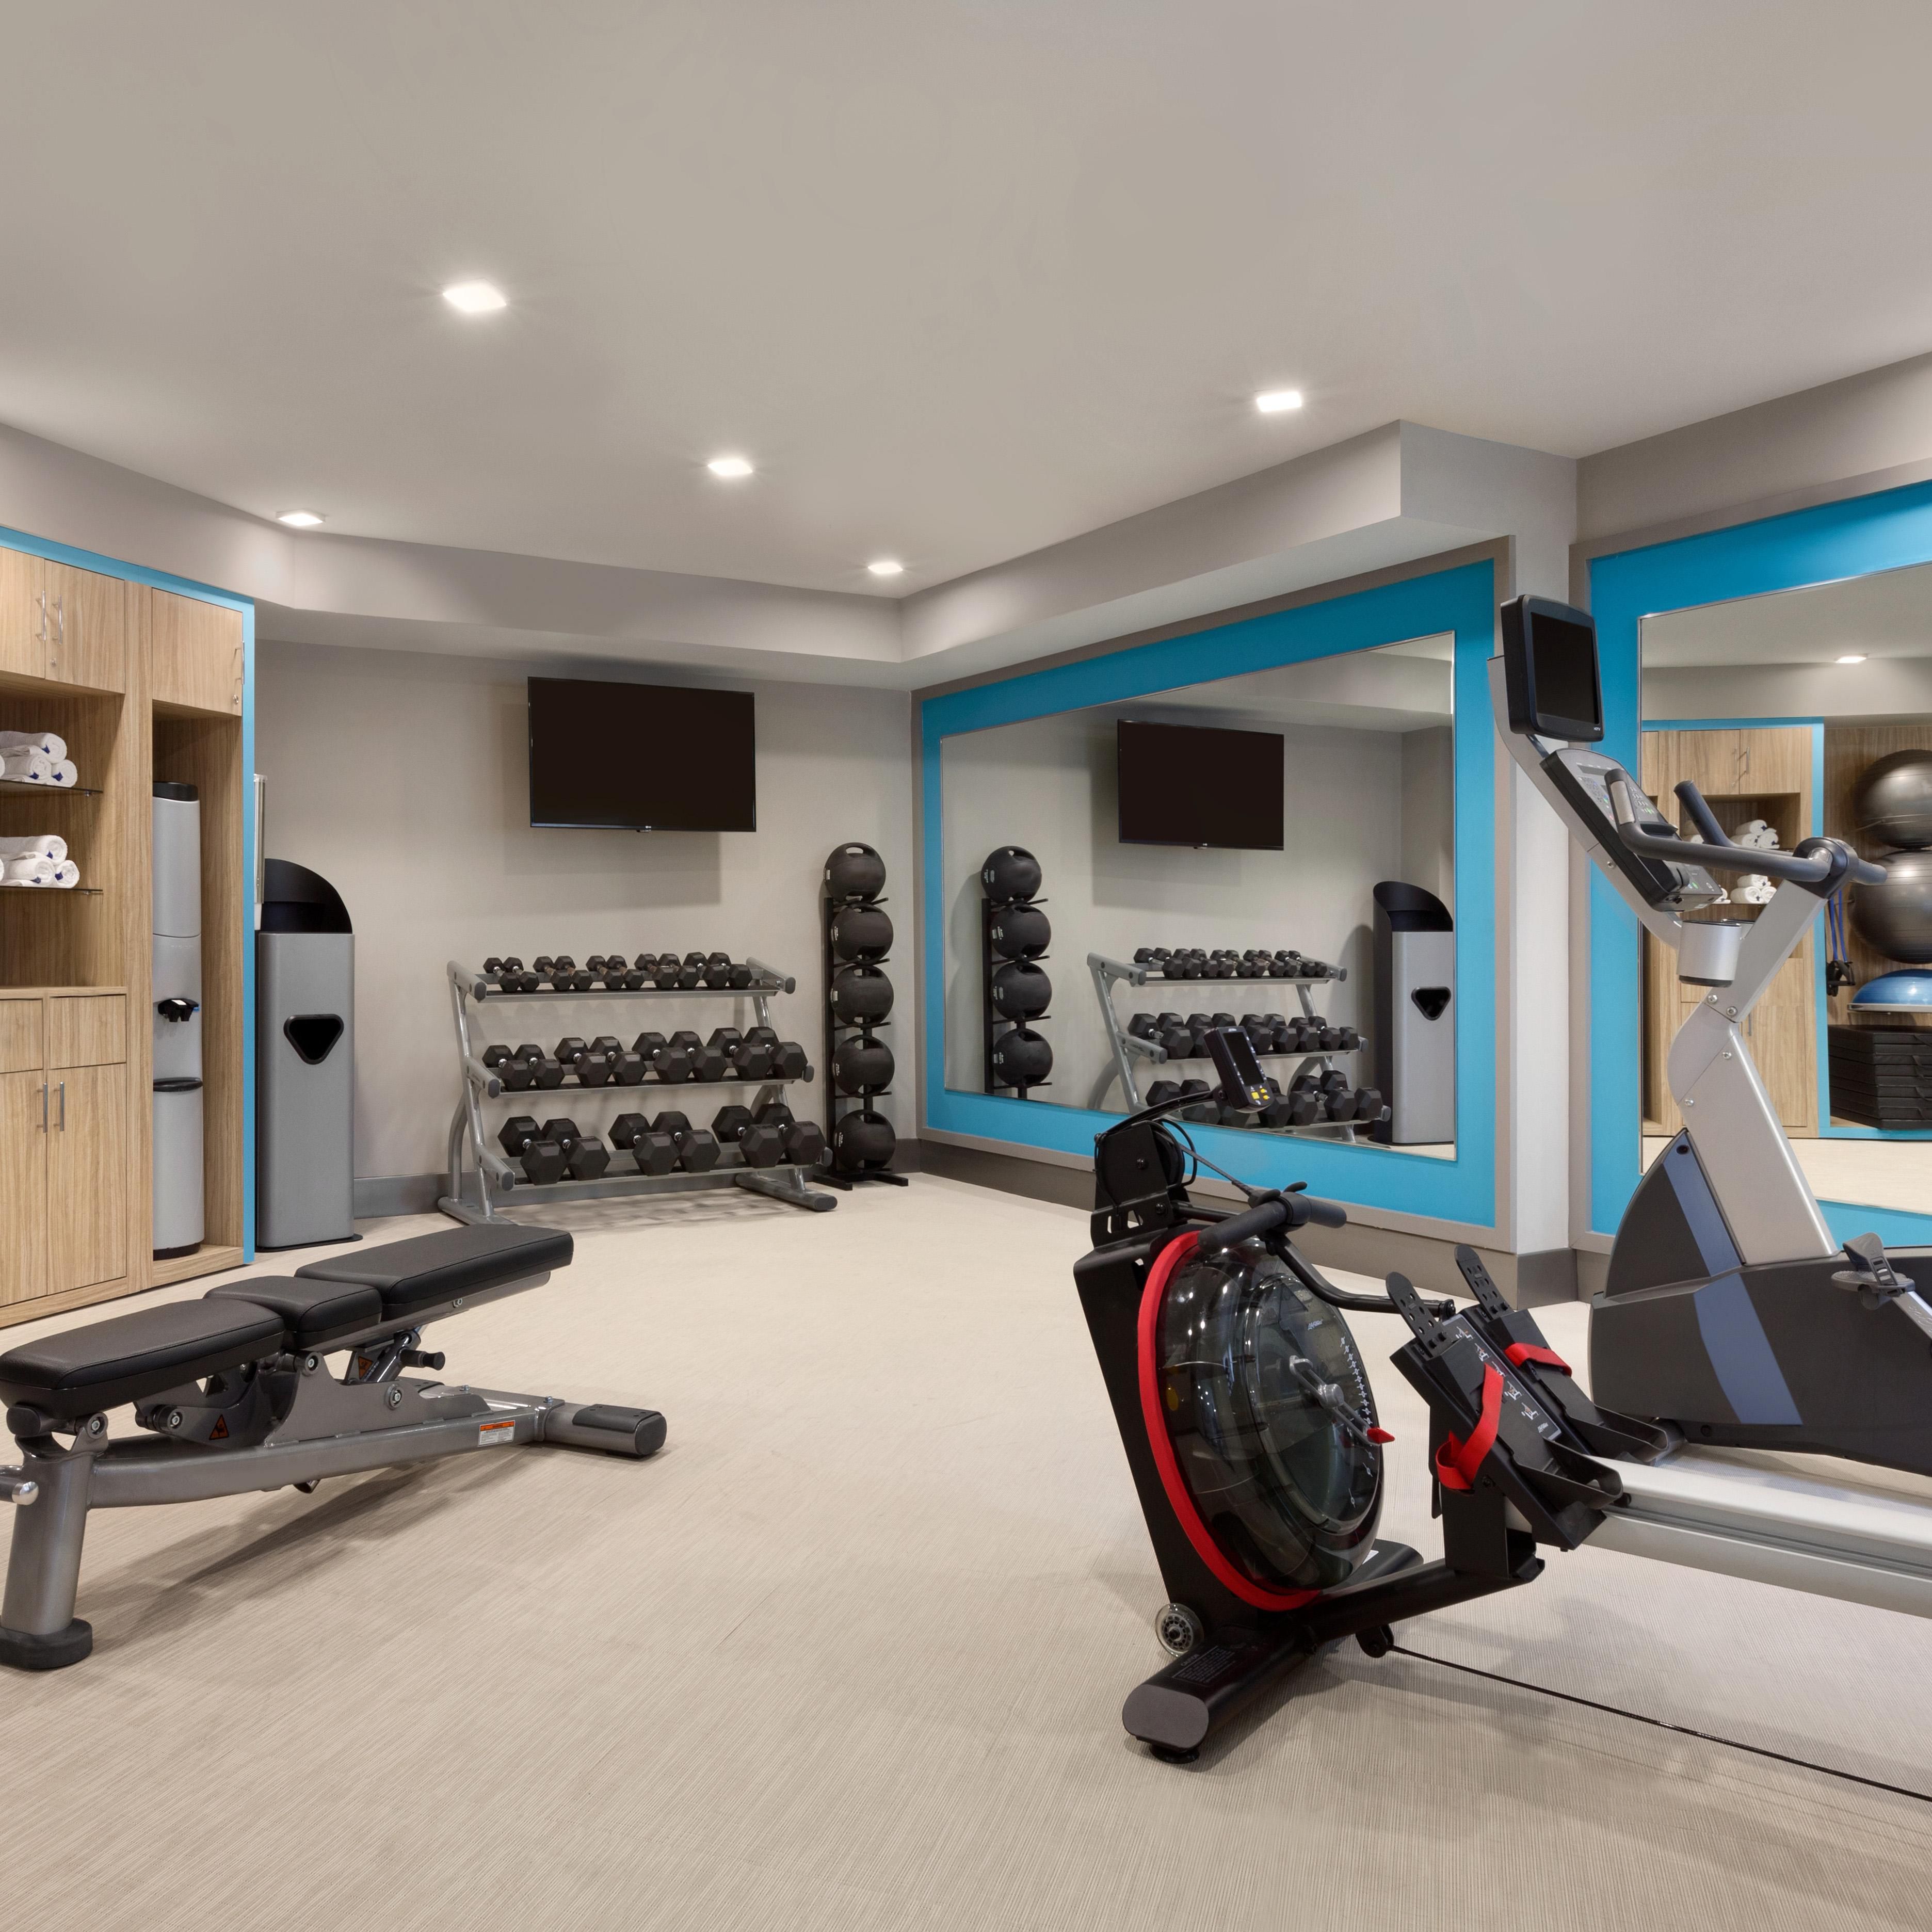 Keep your workout on track with our 24 hour fitness center.